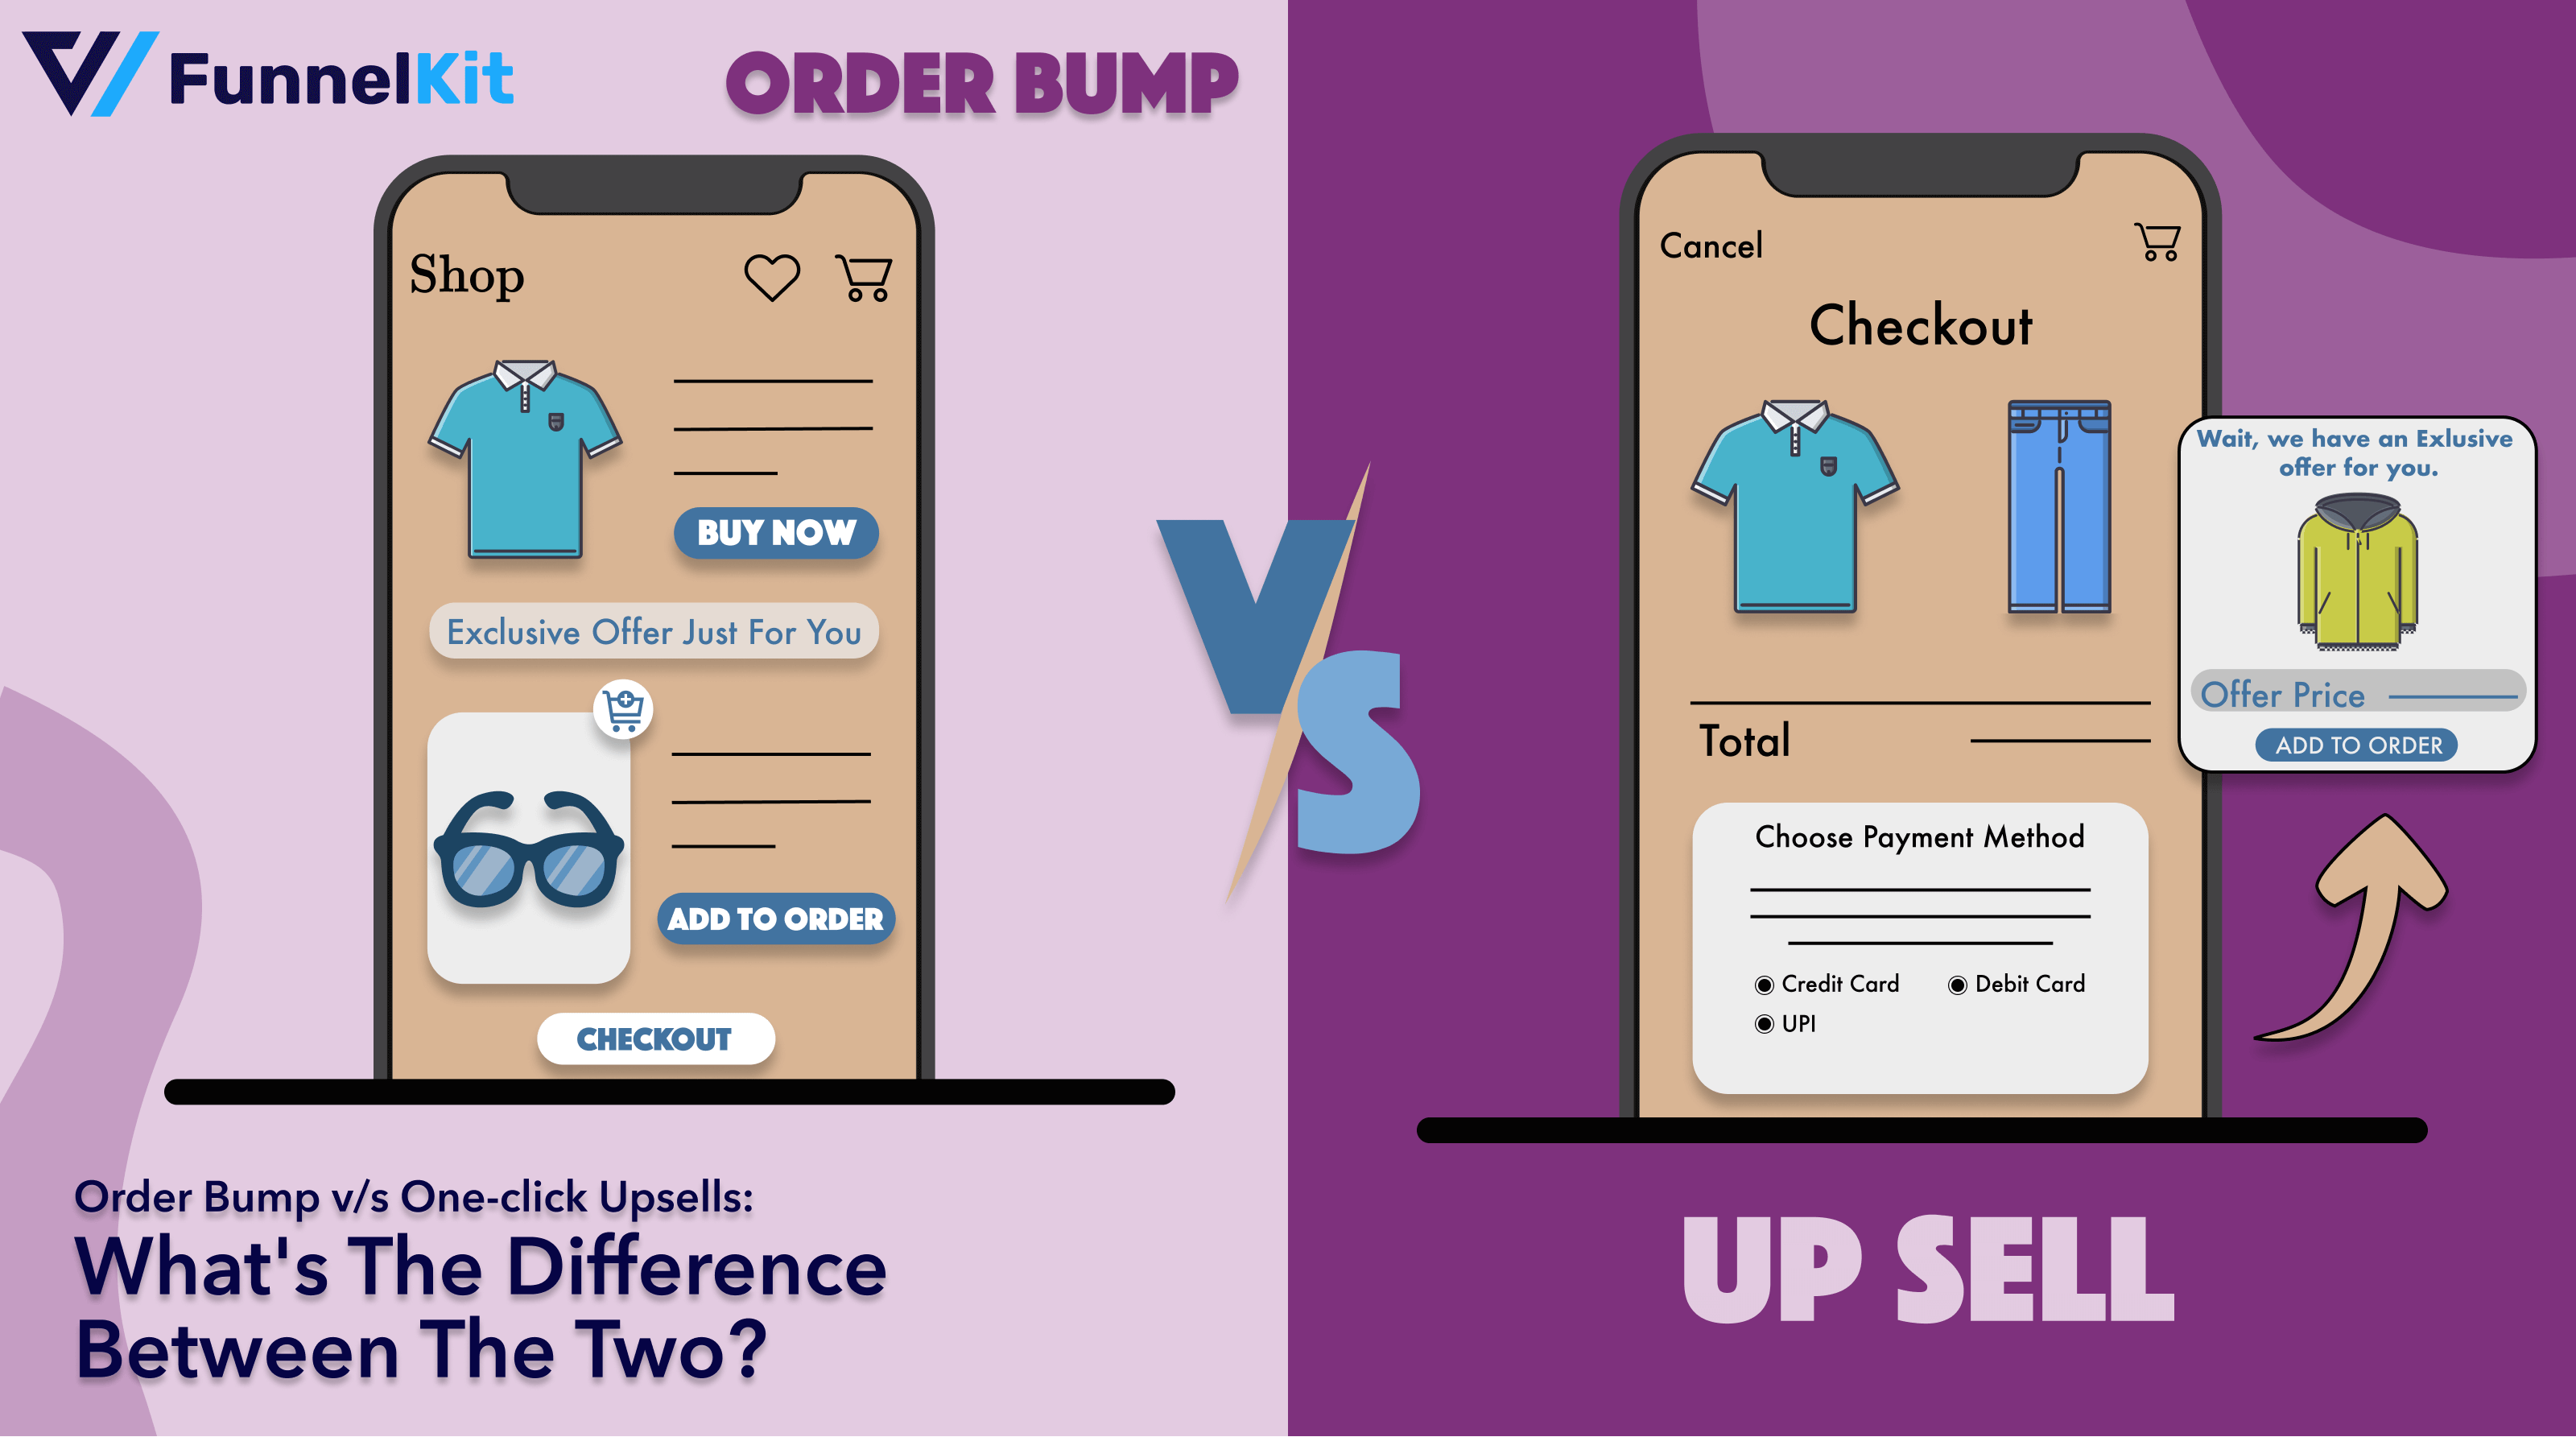 Order Bump v/s One-click Upsells: What's The Difference Between The Two?